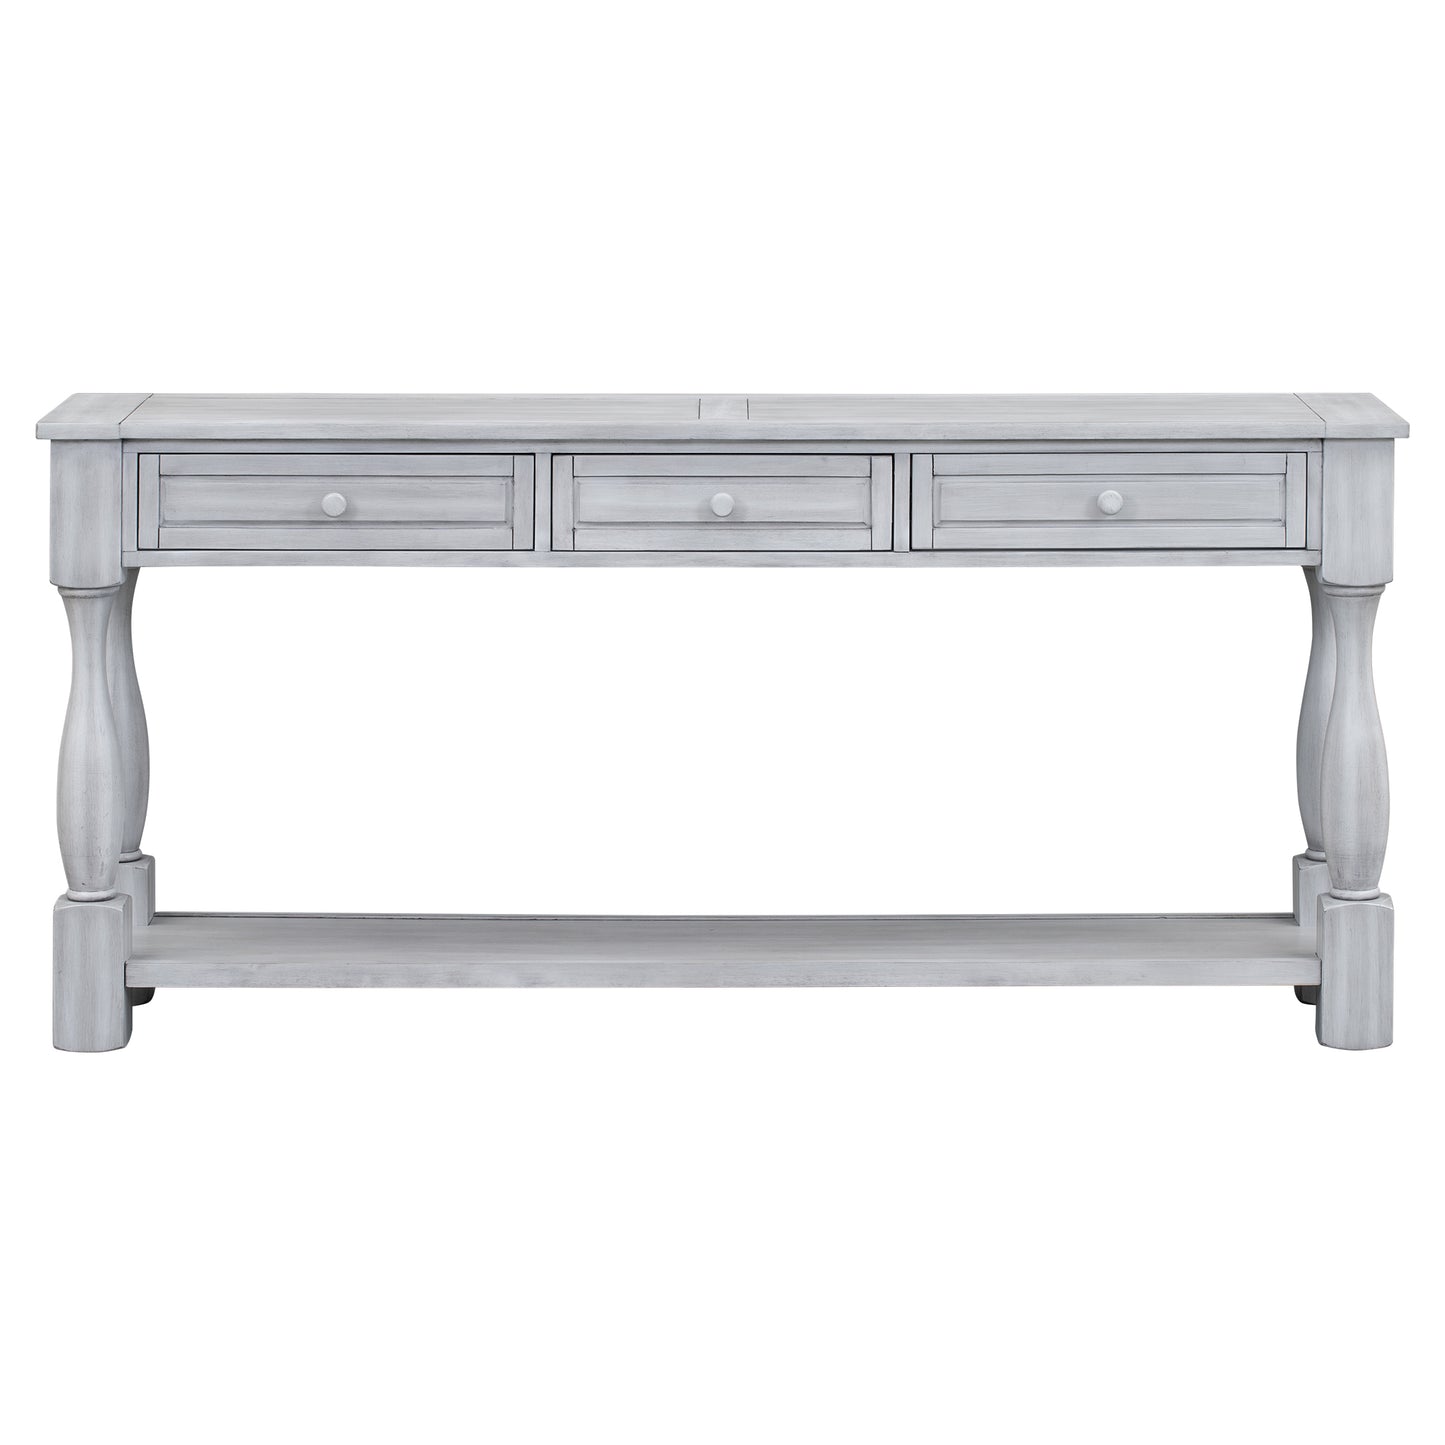 TREXM Console Table 64" Long Extra-thick Sofa Table with Drawers and Shelf for Entryway, Hallway, Living Room (Gray)